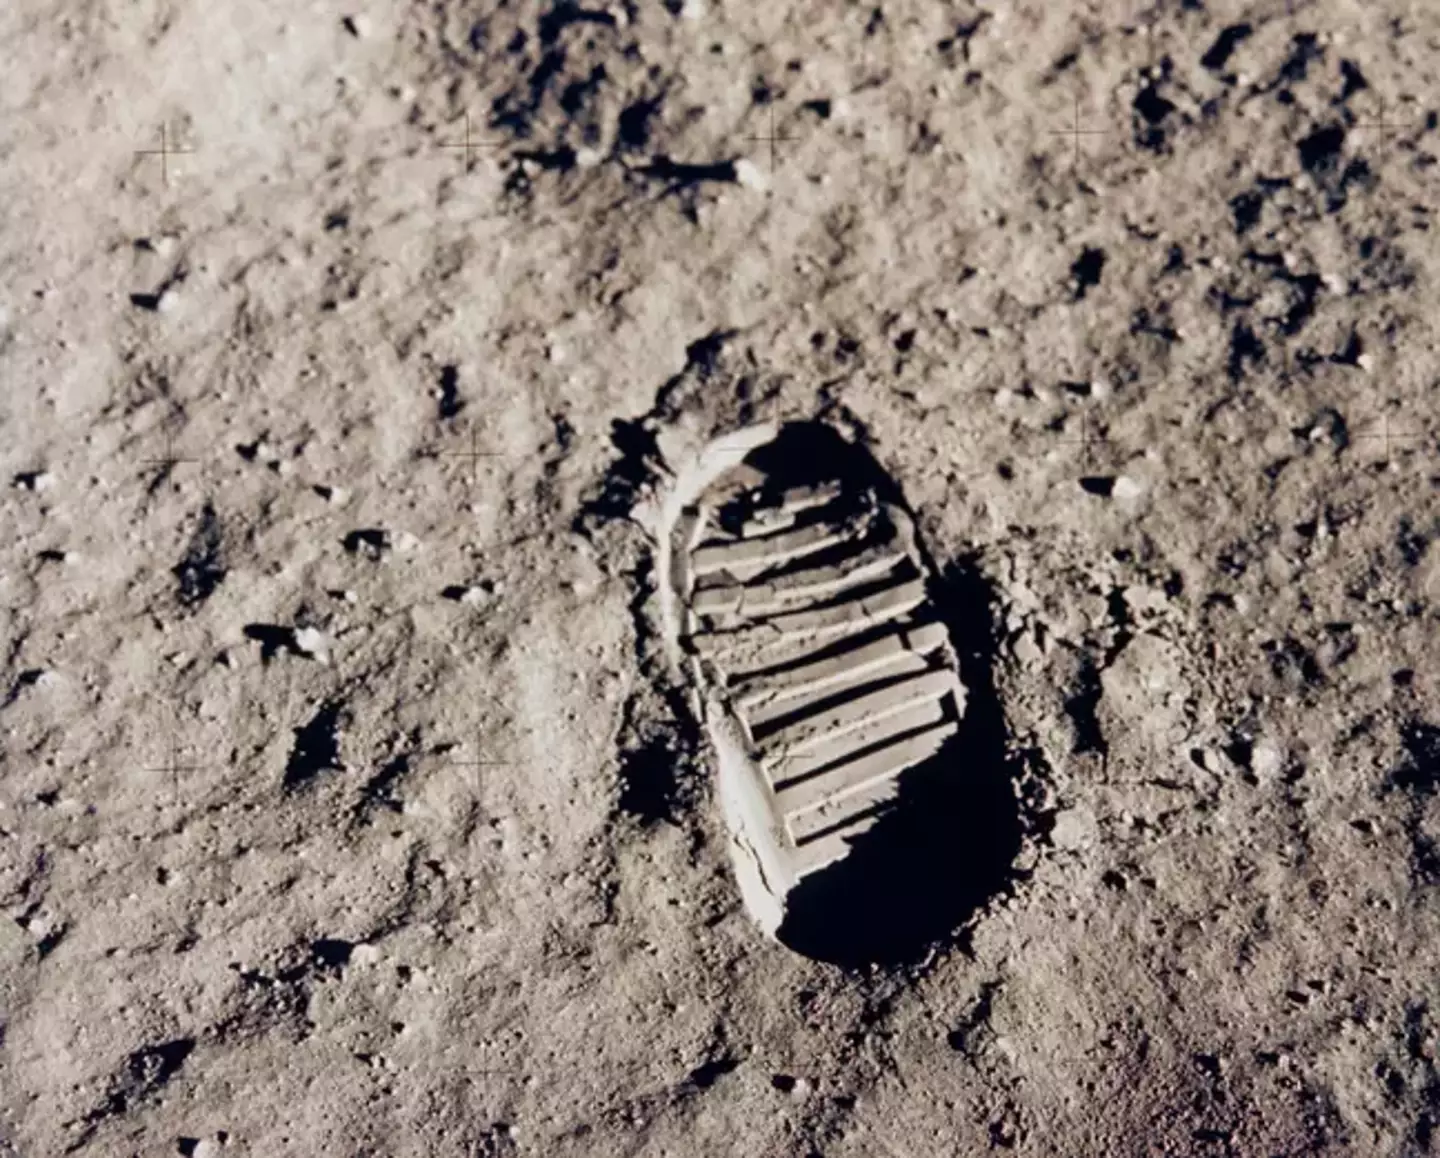 If we didn't land on the moon why are our footprints there?